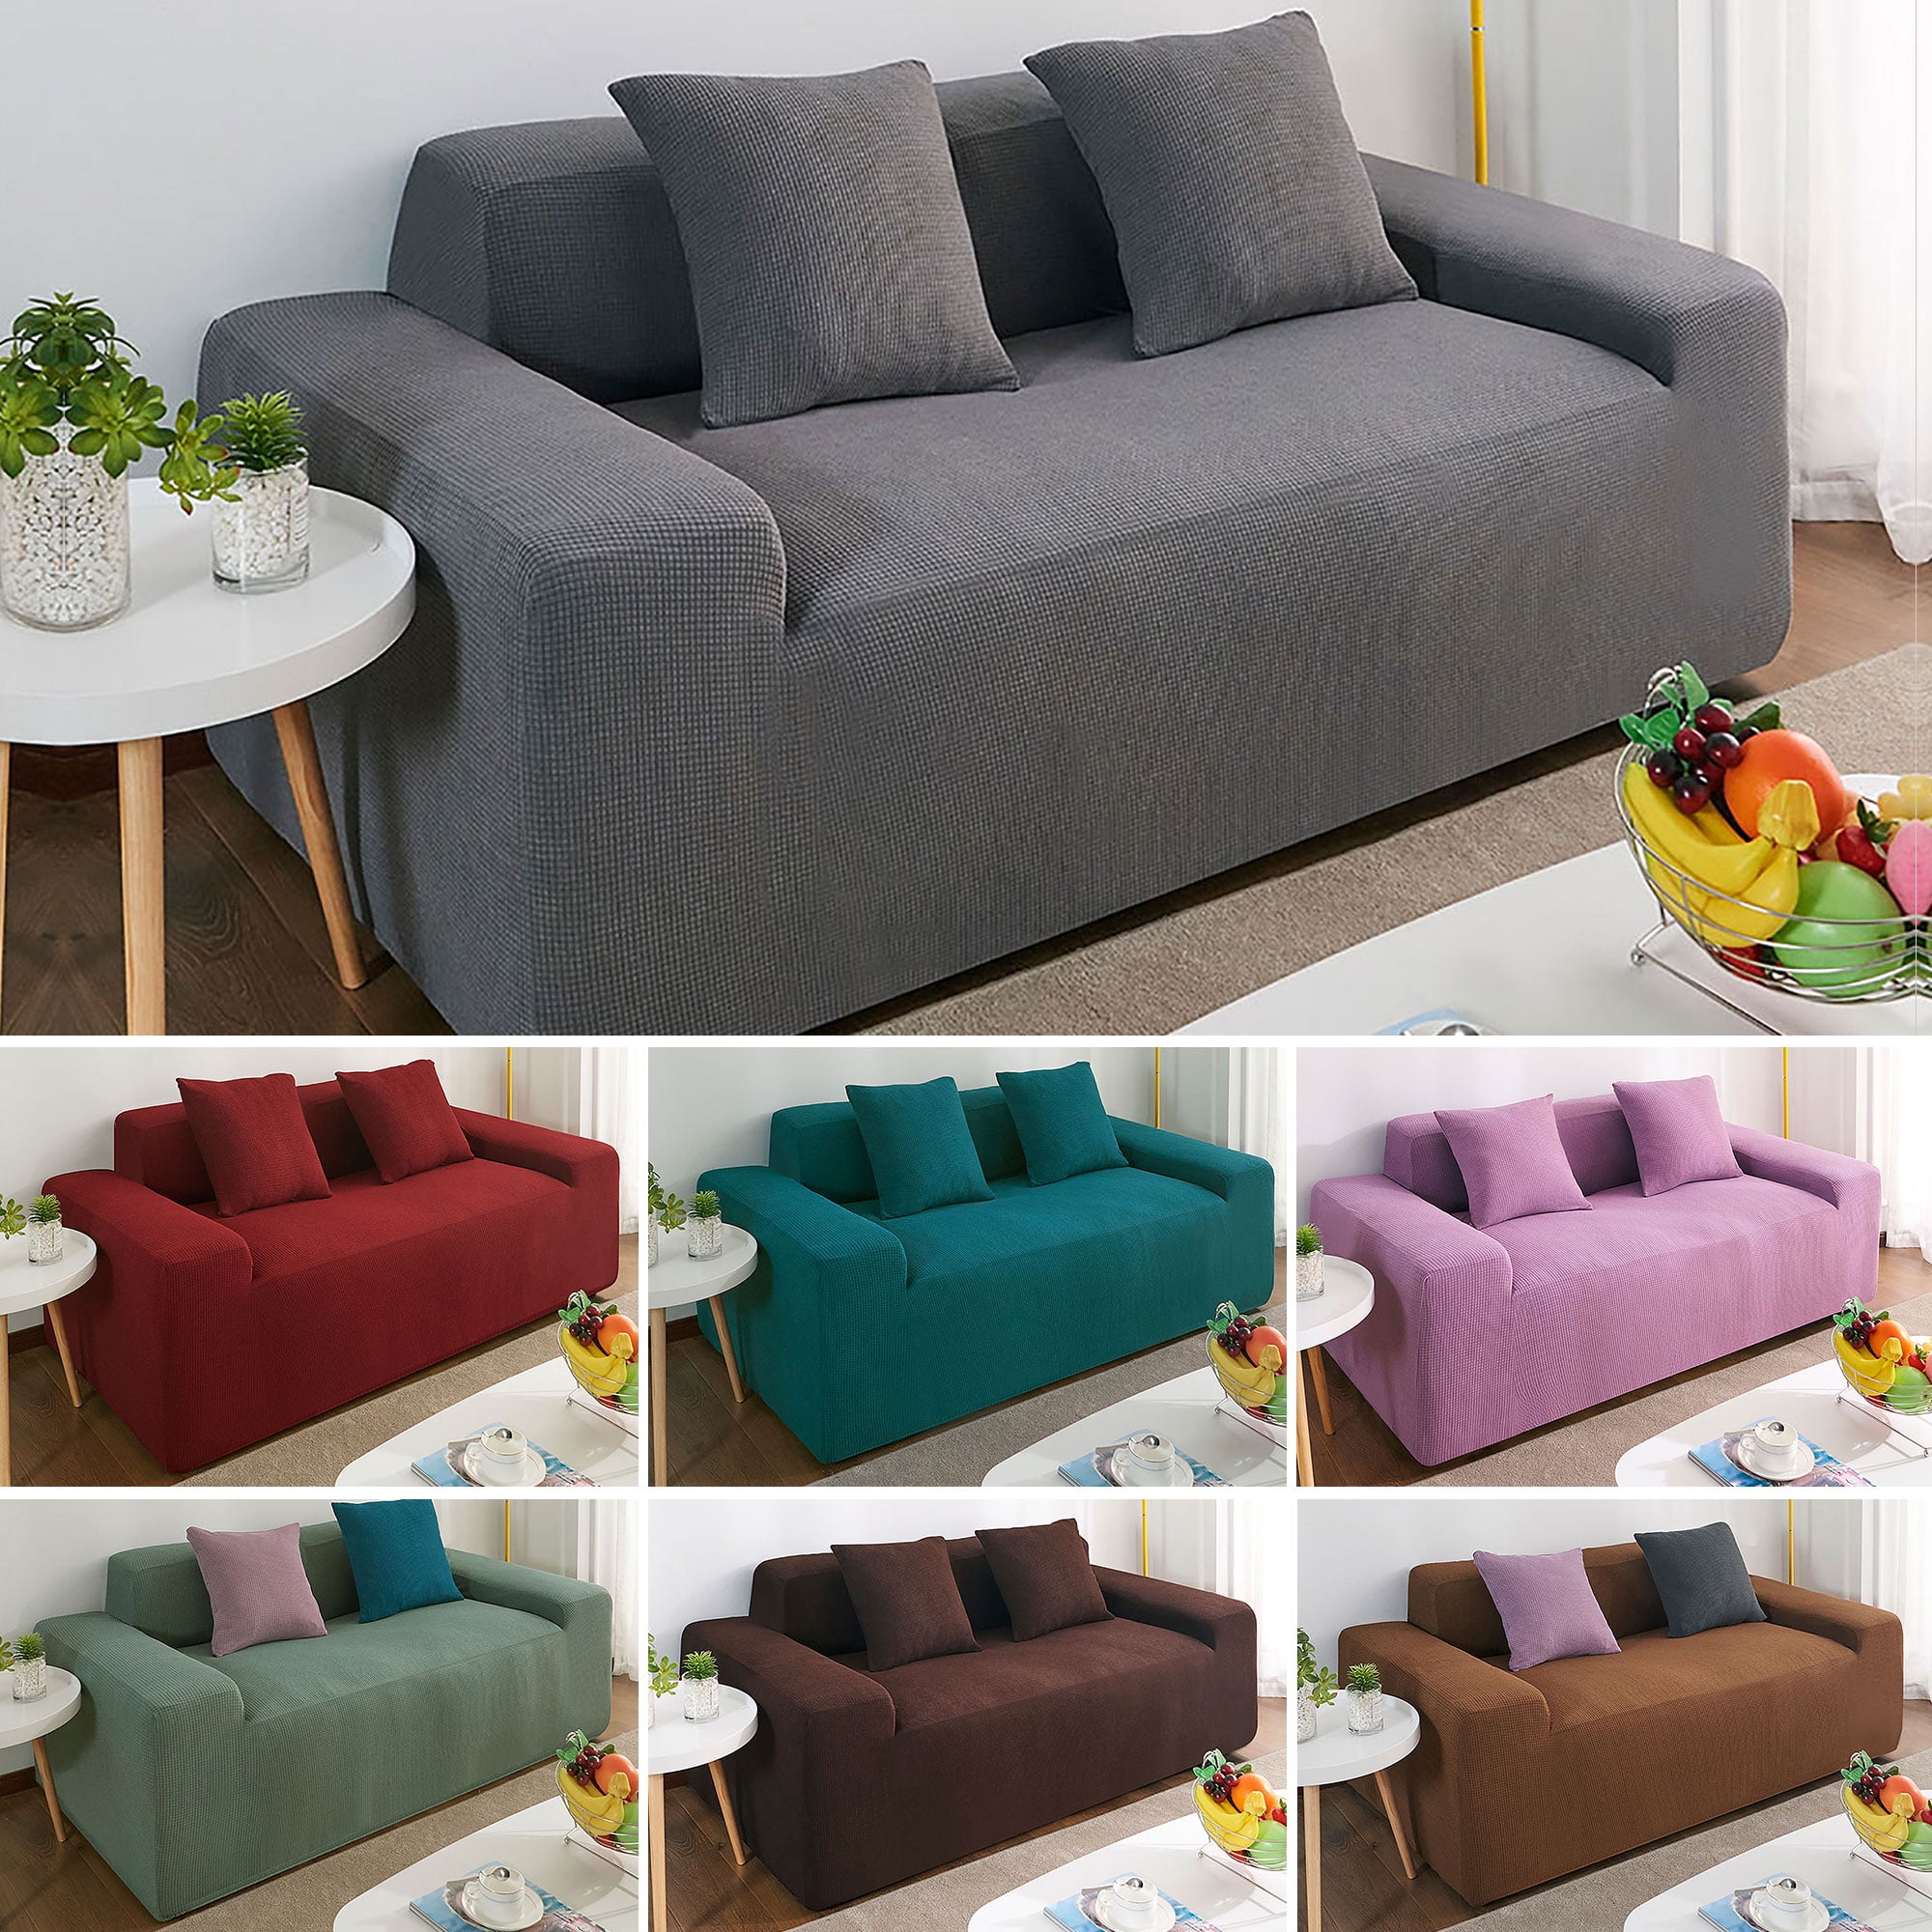 1-4 Seater Elastic Plain Slipcover Stretch Soft Couch Furniture L-Shaped Protect 